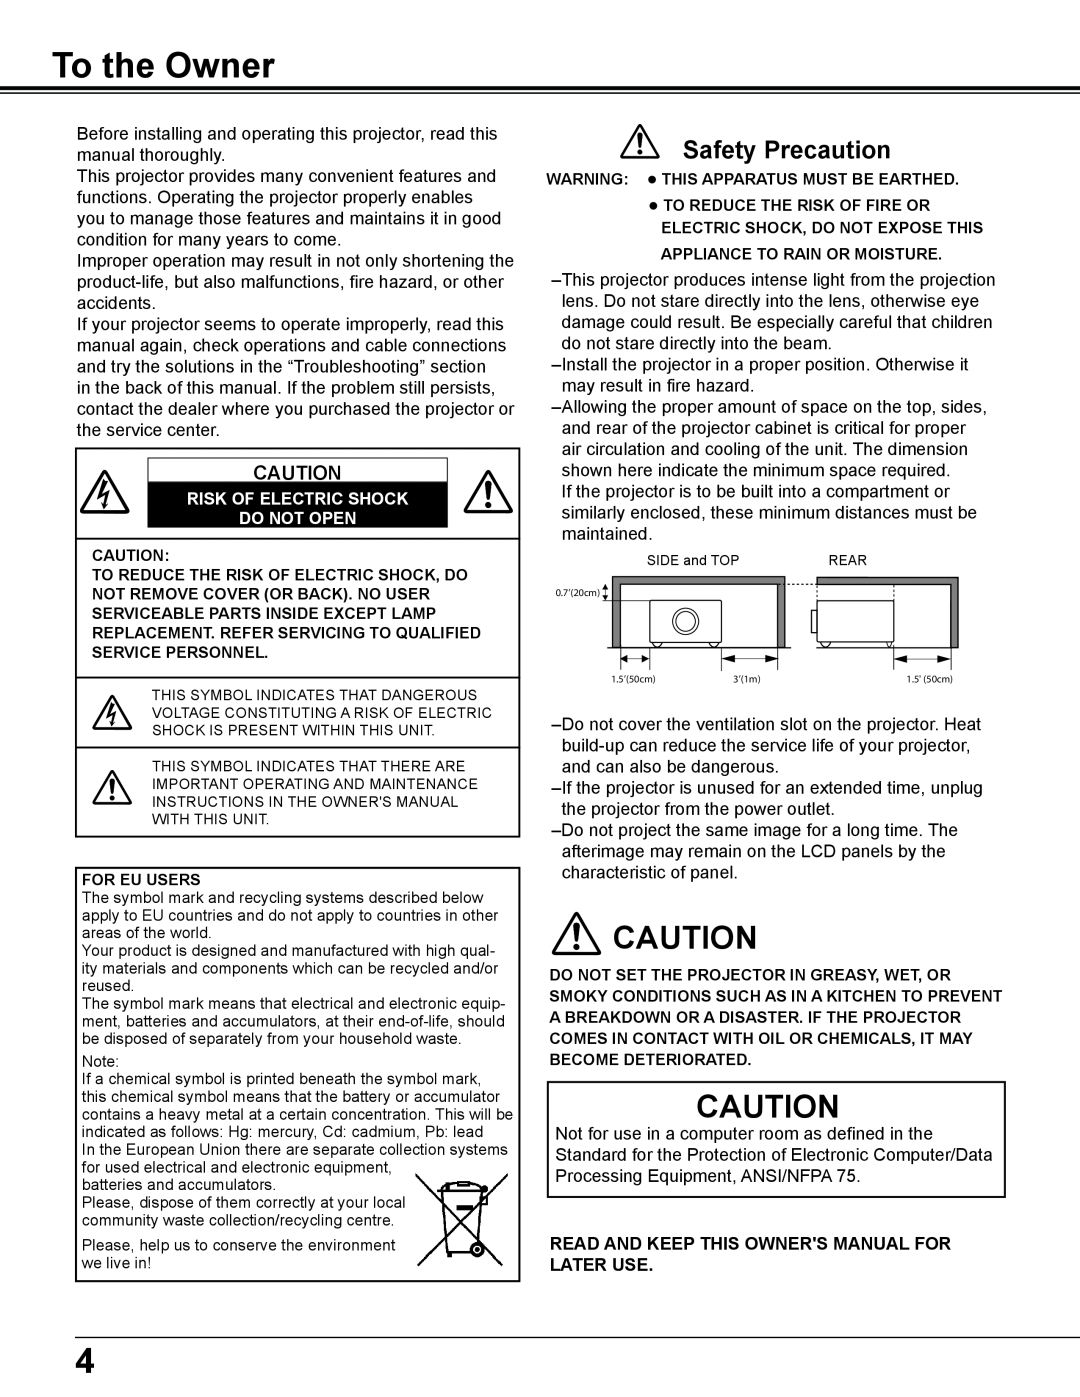 Sanyo PLC-WL2503A owner manual To the Owner, Safety Precaution, Risk Of Electric Shock Do Not Open 